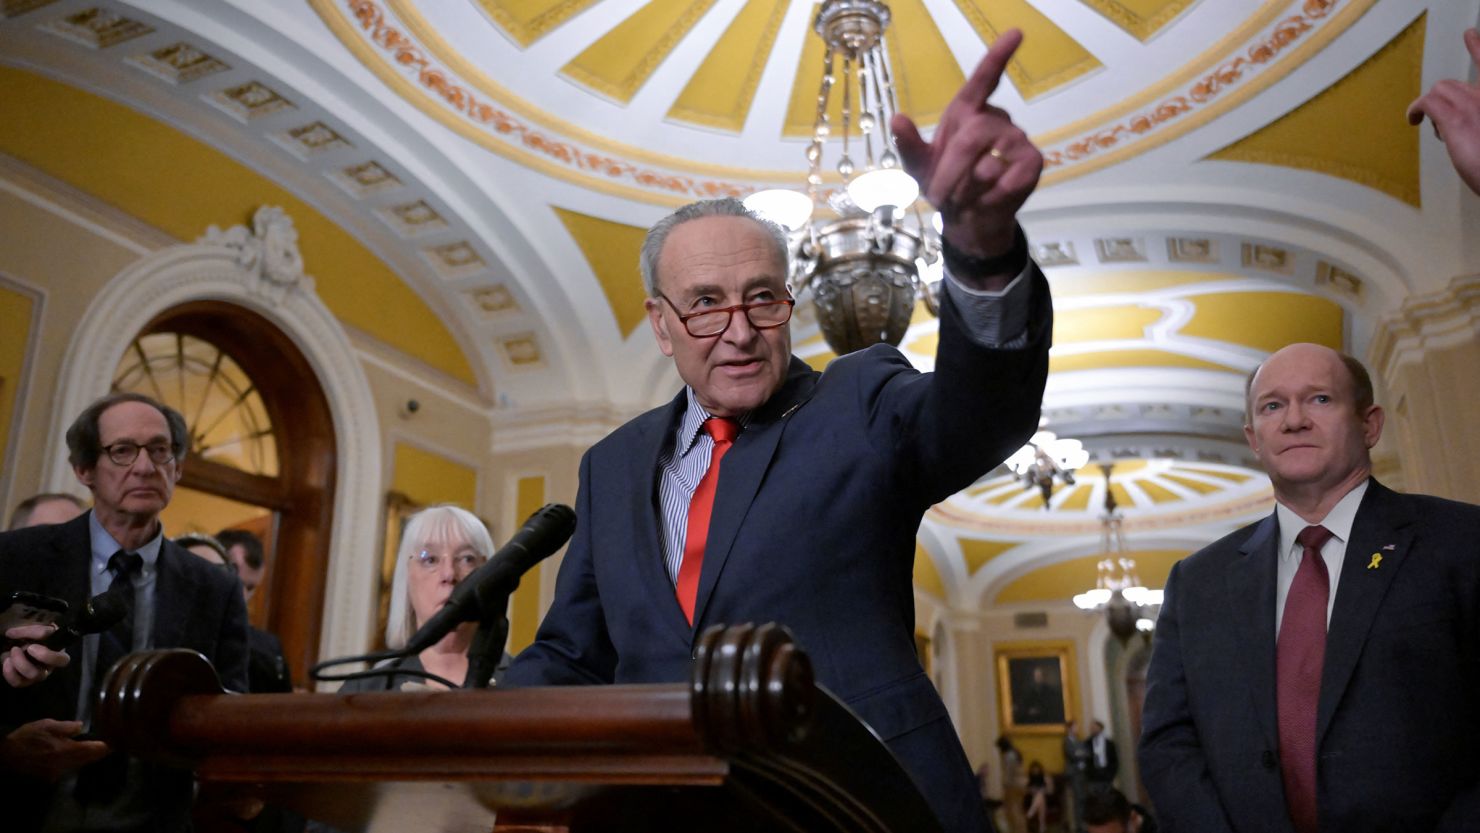 Senate Majority Leader Chuck Schumer speaks during a press conference on Capitol Hill on March 12.